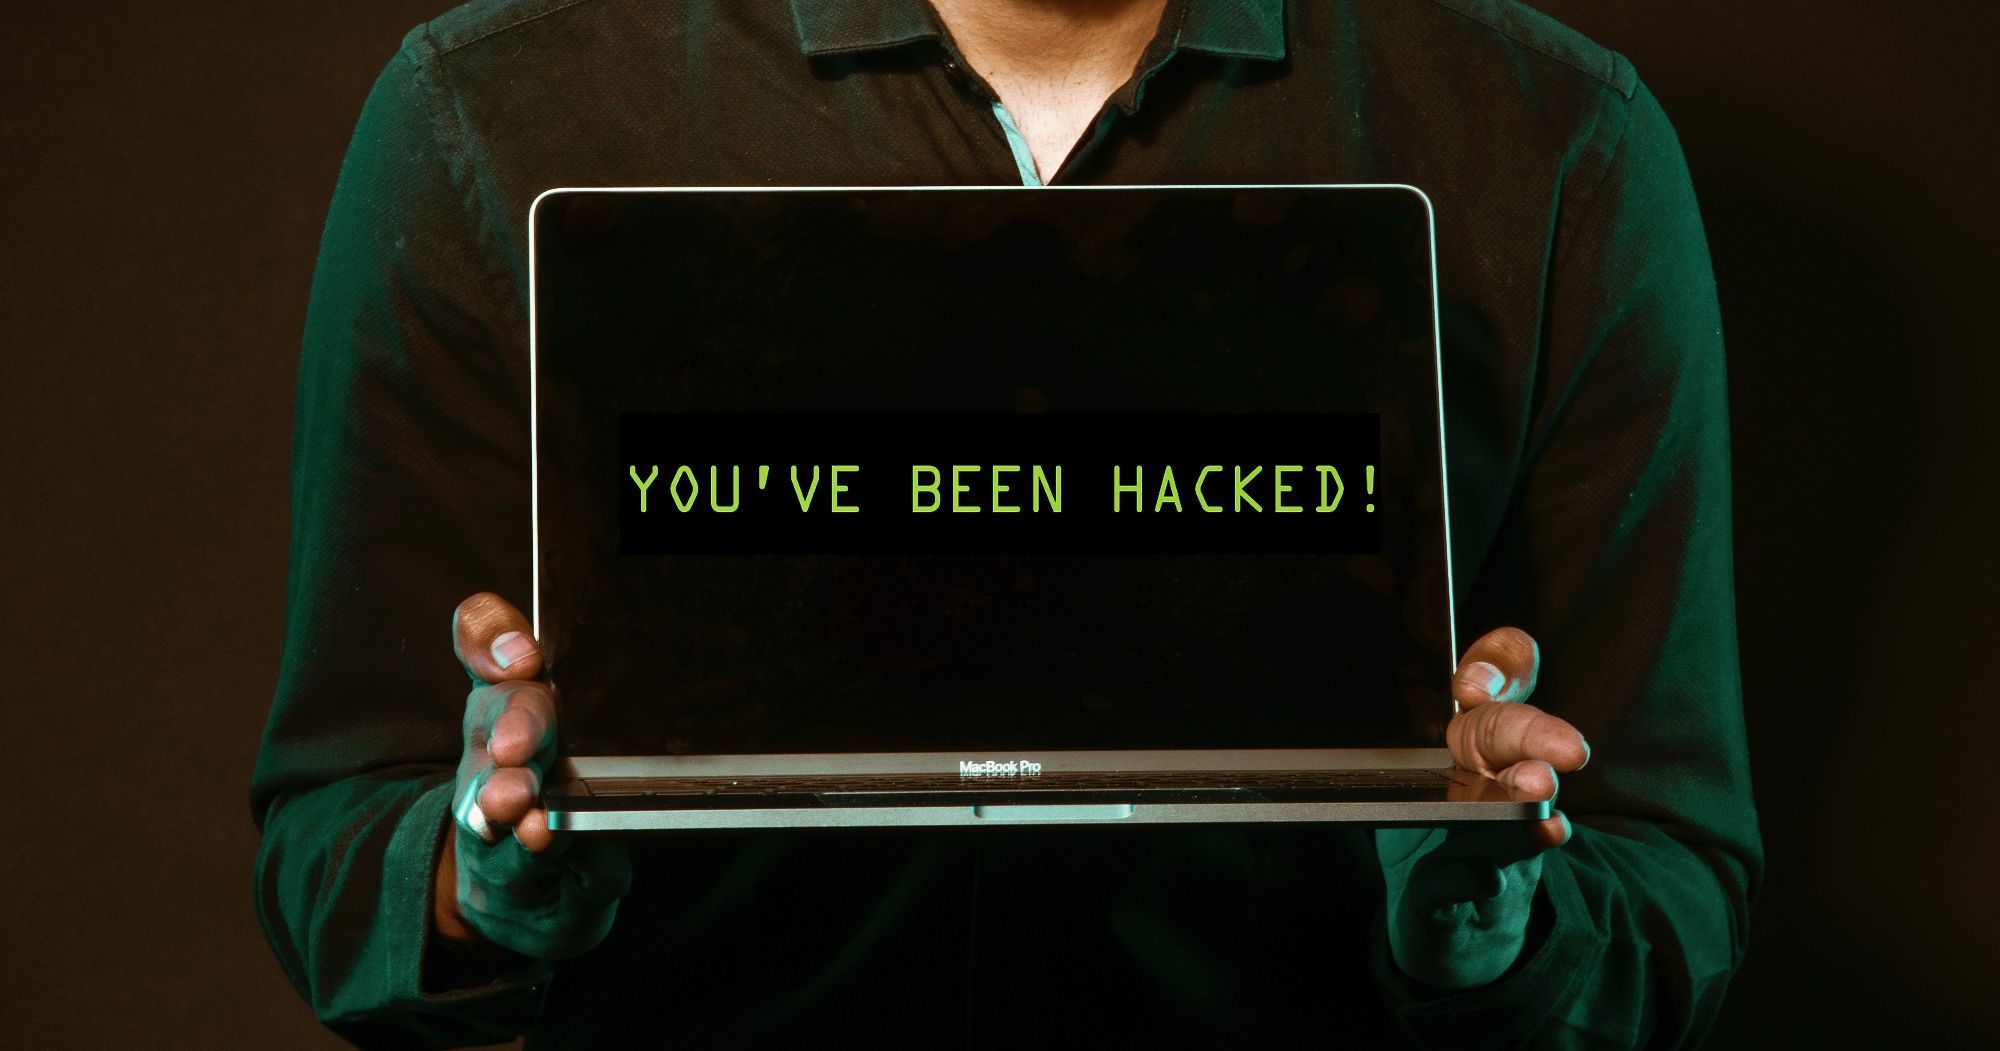 person holding laptop displaying "you've been hacked" on screen